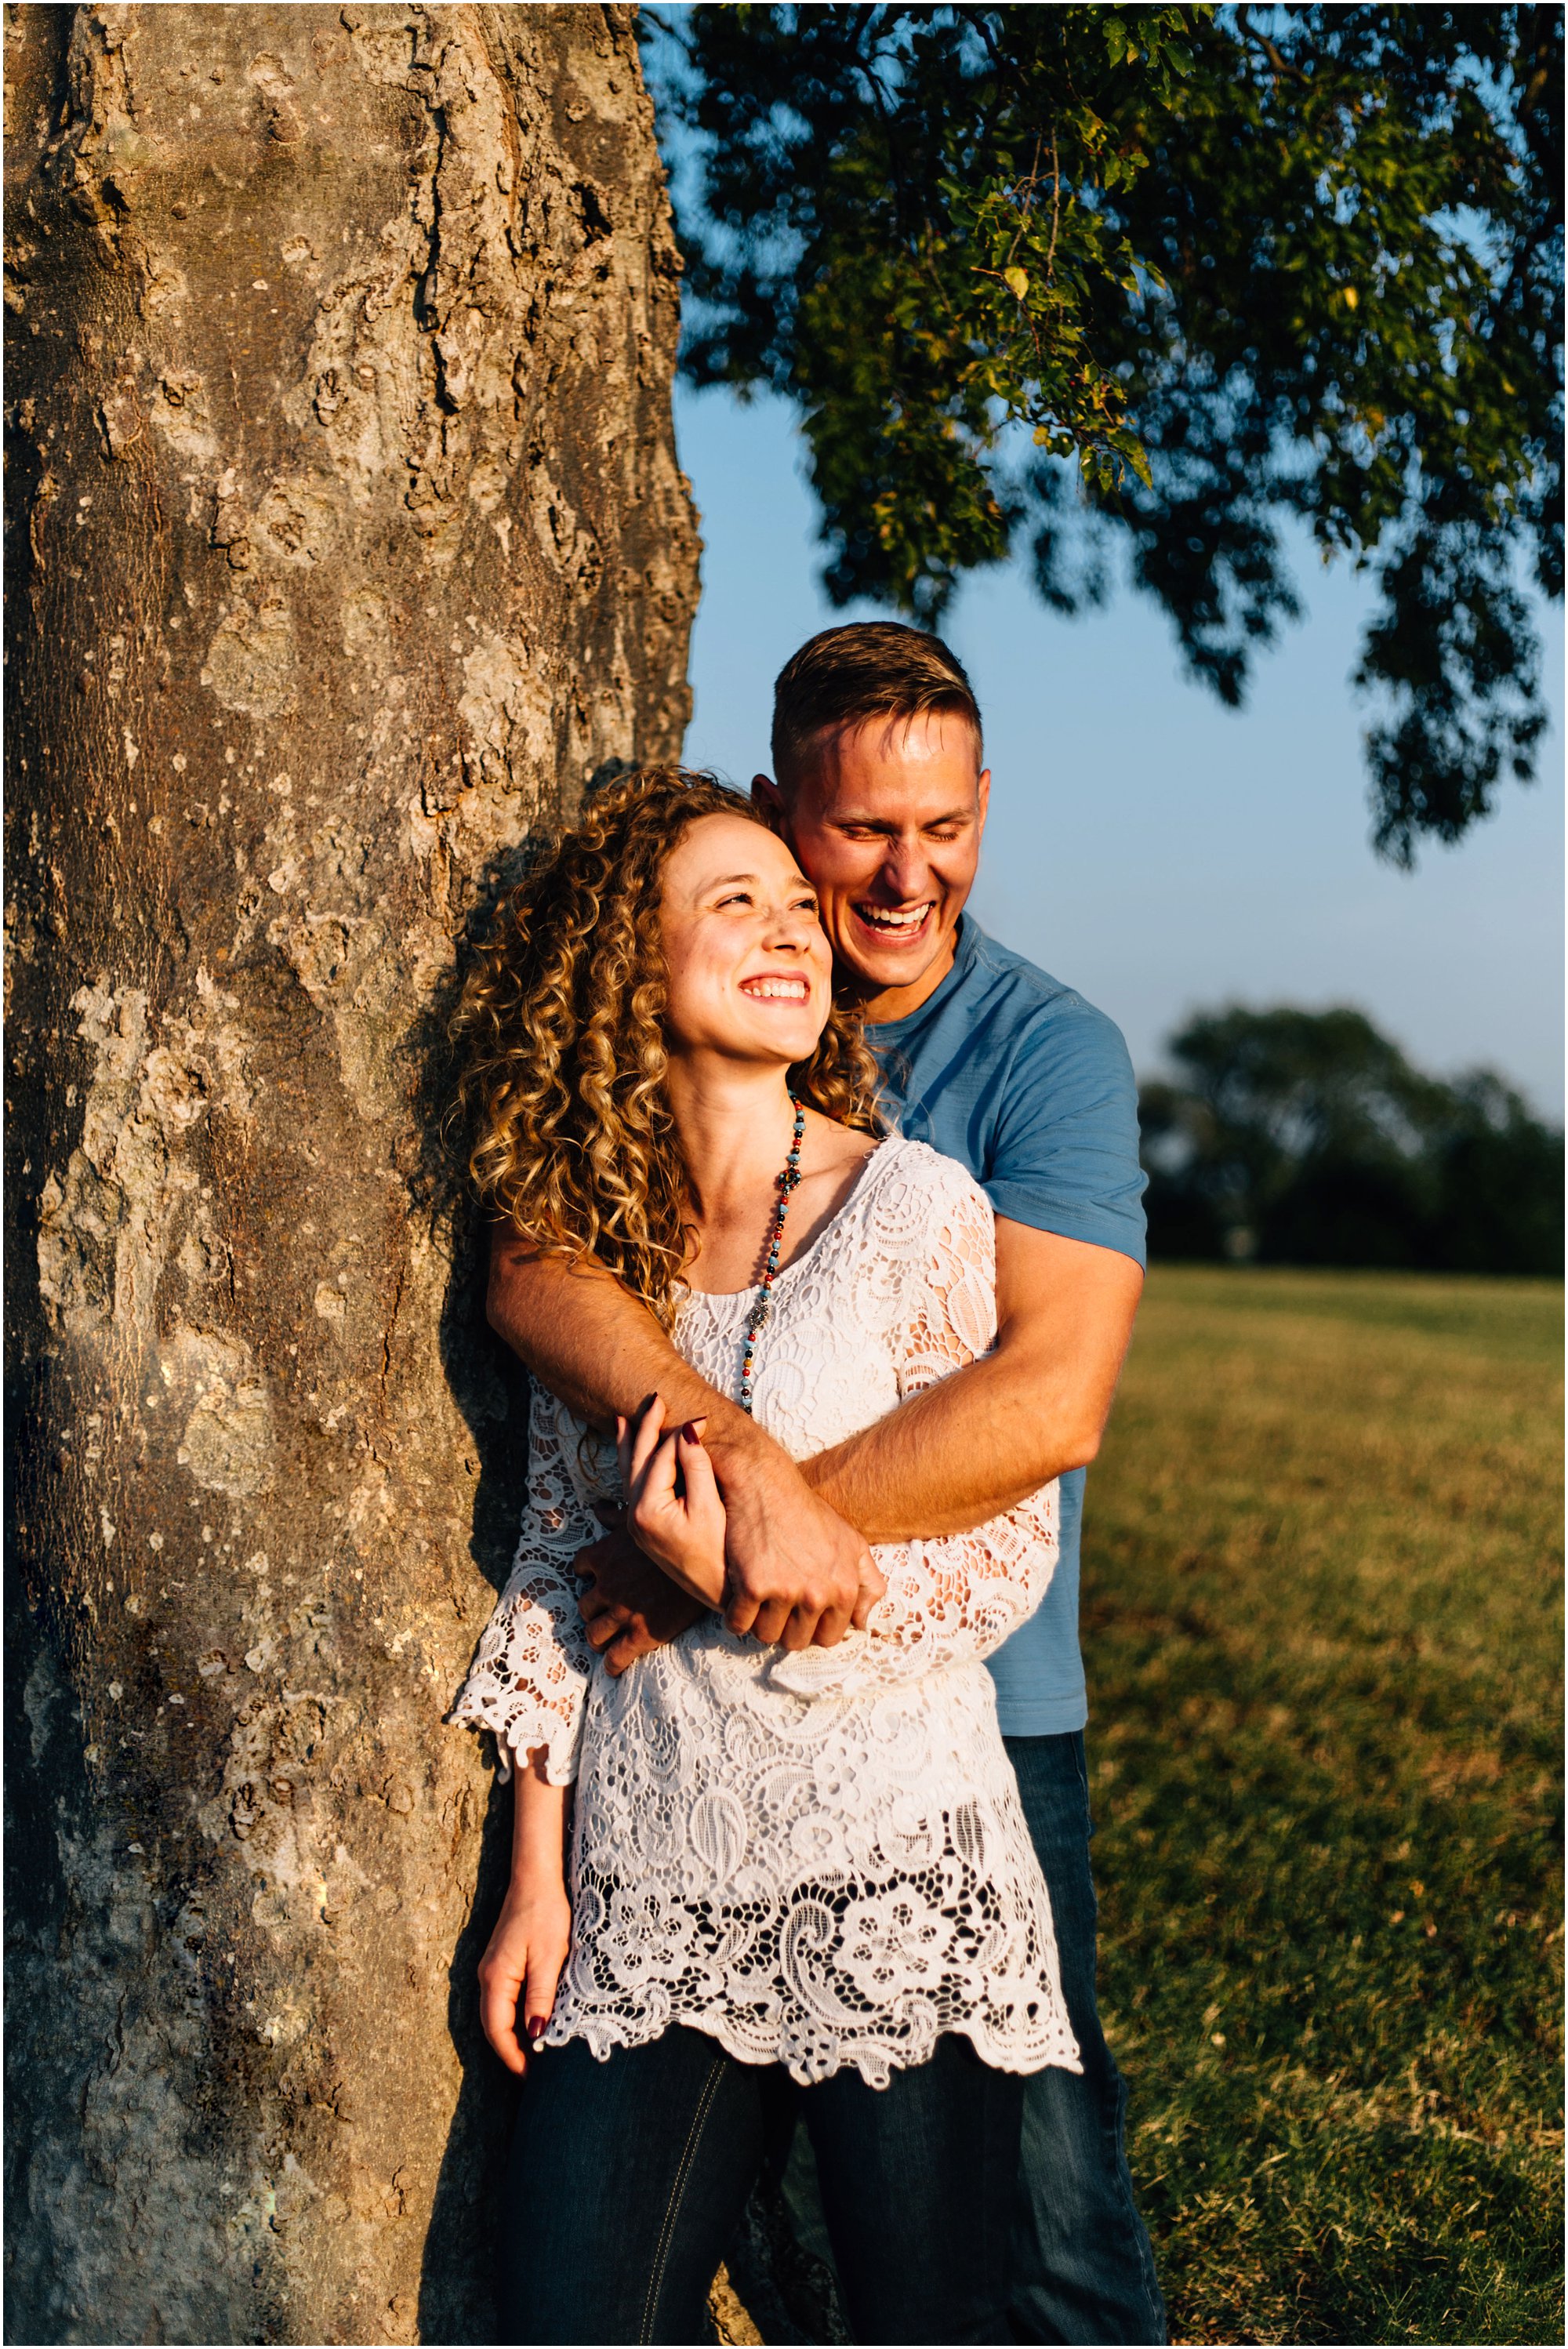 Newly engaged couple hugging and leaning against tree at Nashville's Fort Negley